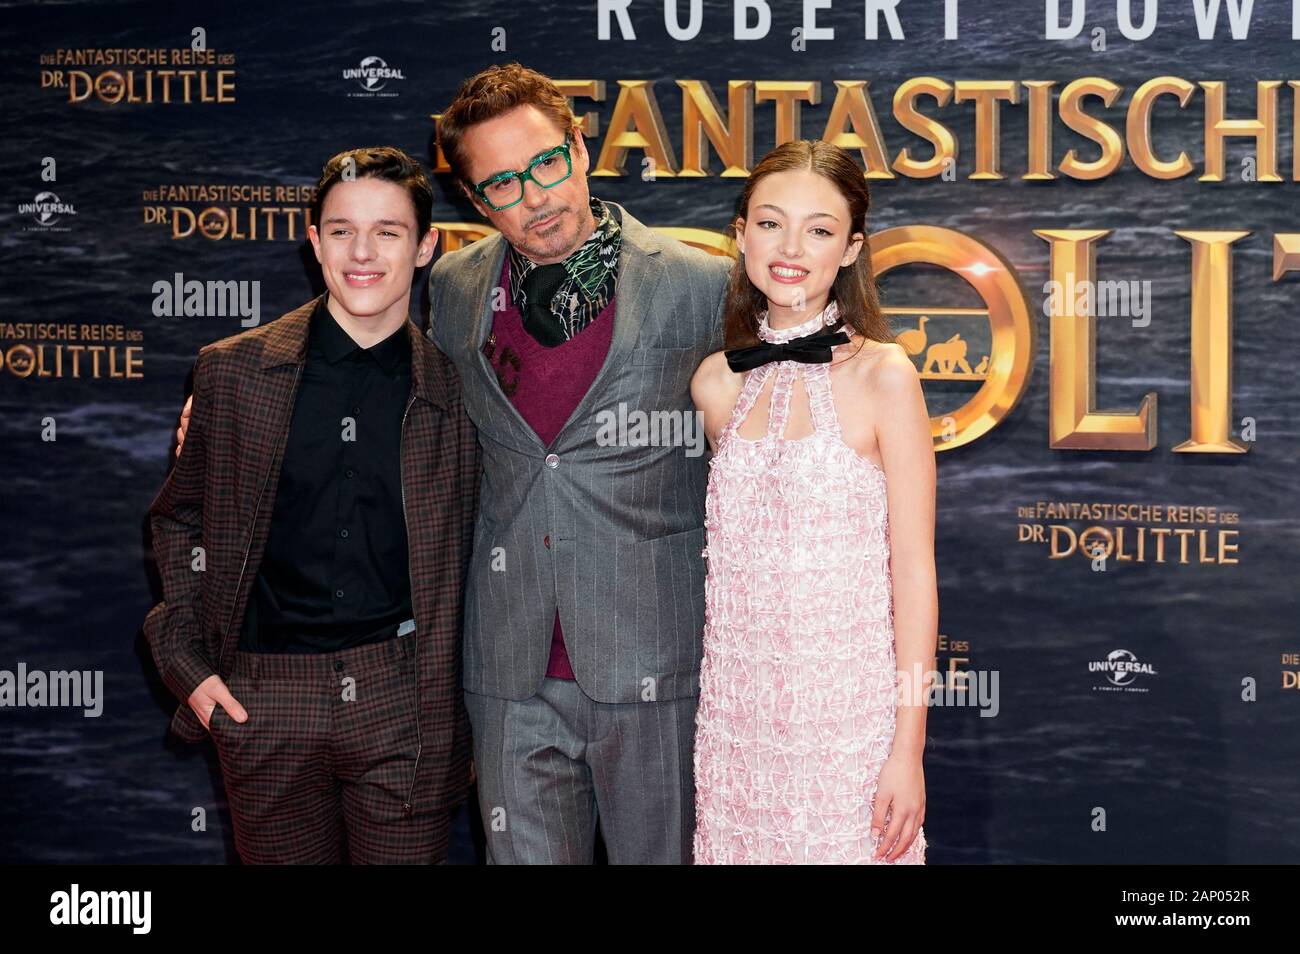 Harry Collet Robert Downey Jr And Carmel Laniado At The Premiere Of The Movie The Fantastic Journey Of Dr Dolittle At The Zoo Palast Berlin January 19 Usage Worldwide Stock Photo Alamy